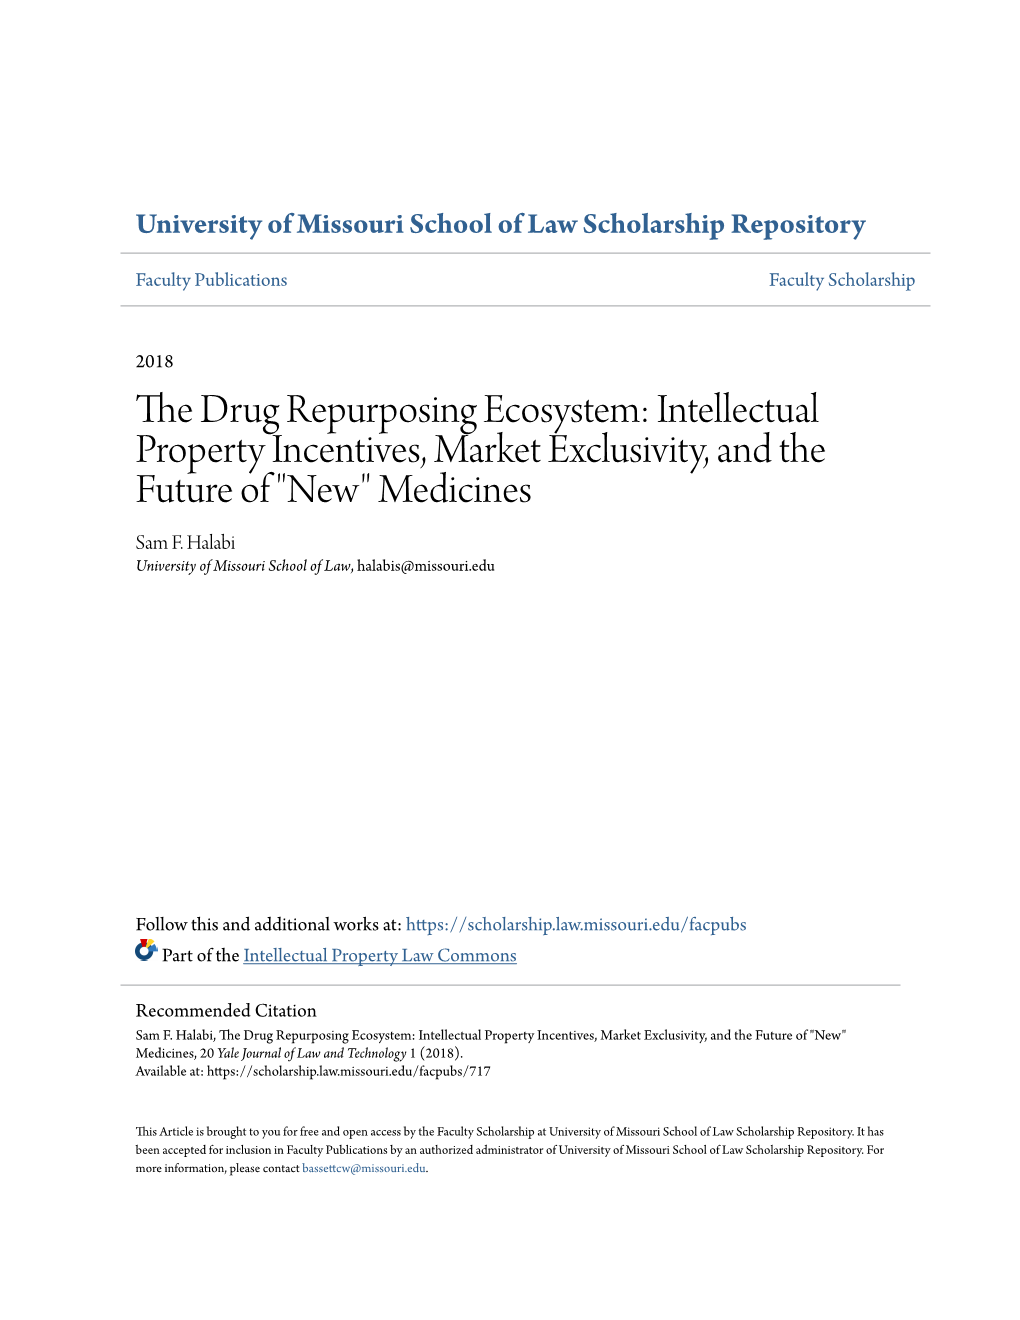 The Drug Repurposing Ecosystem: Intellectual Property Incentives, Market Exclusivity, and the Future of "New" Medicines Sam F